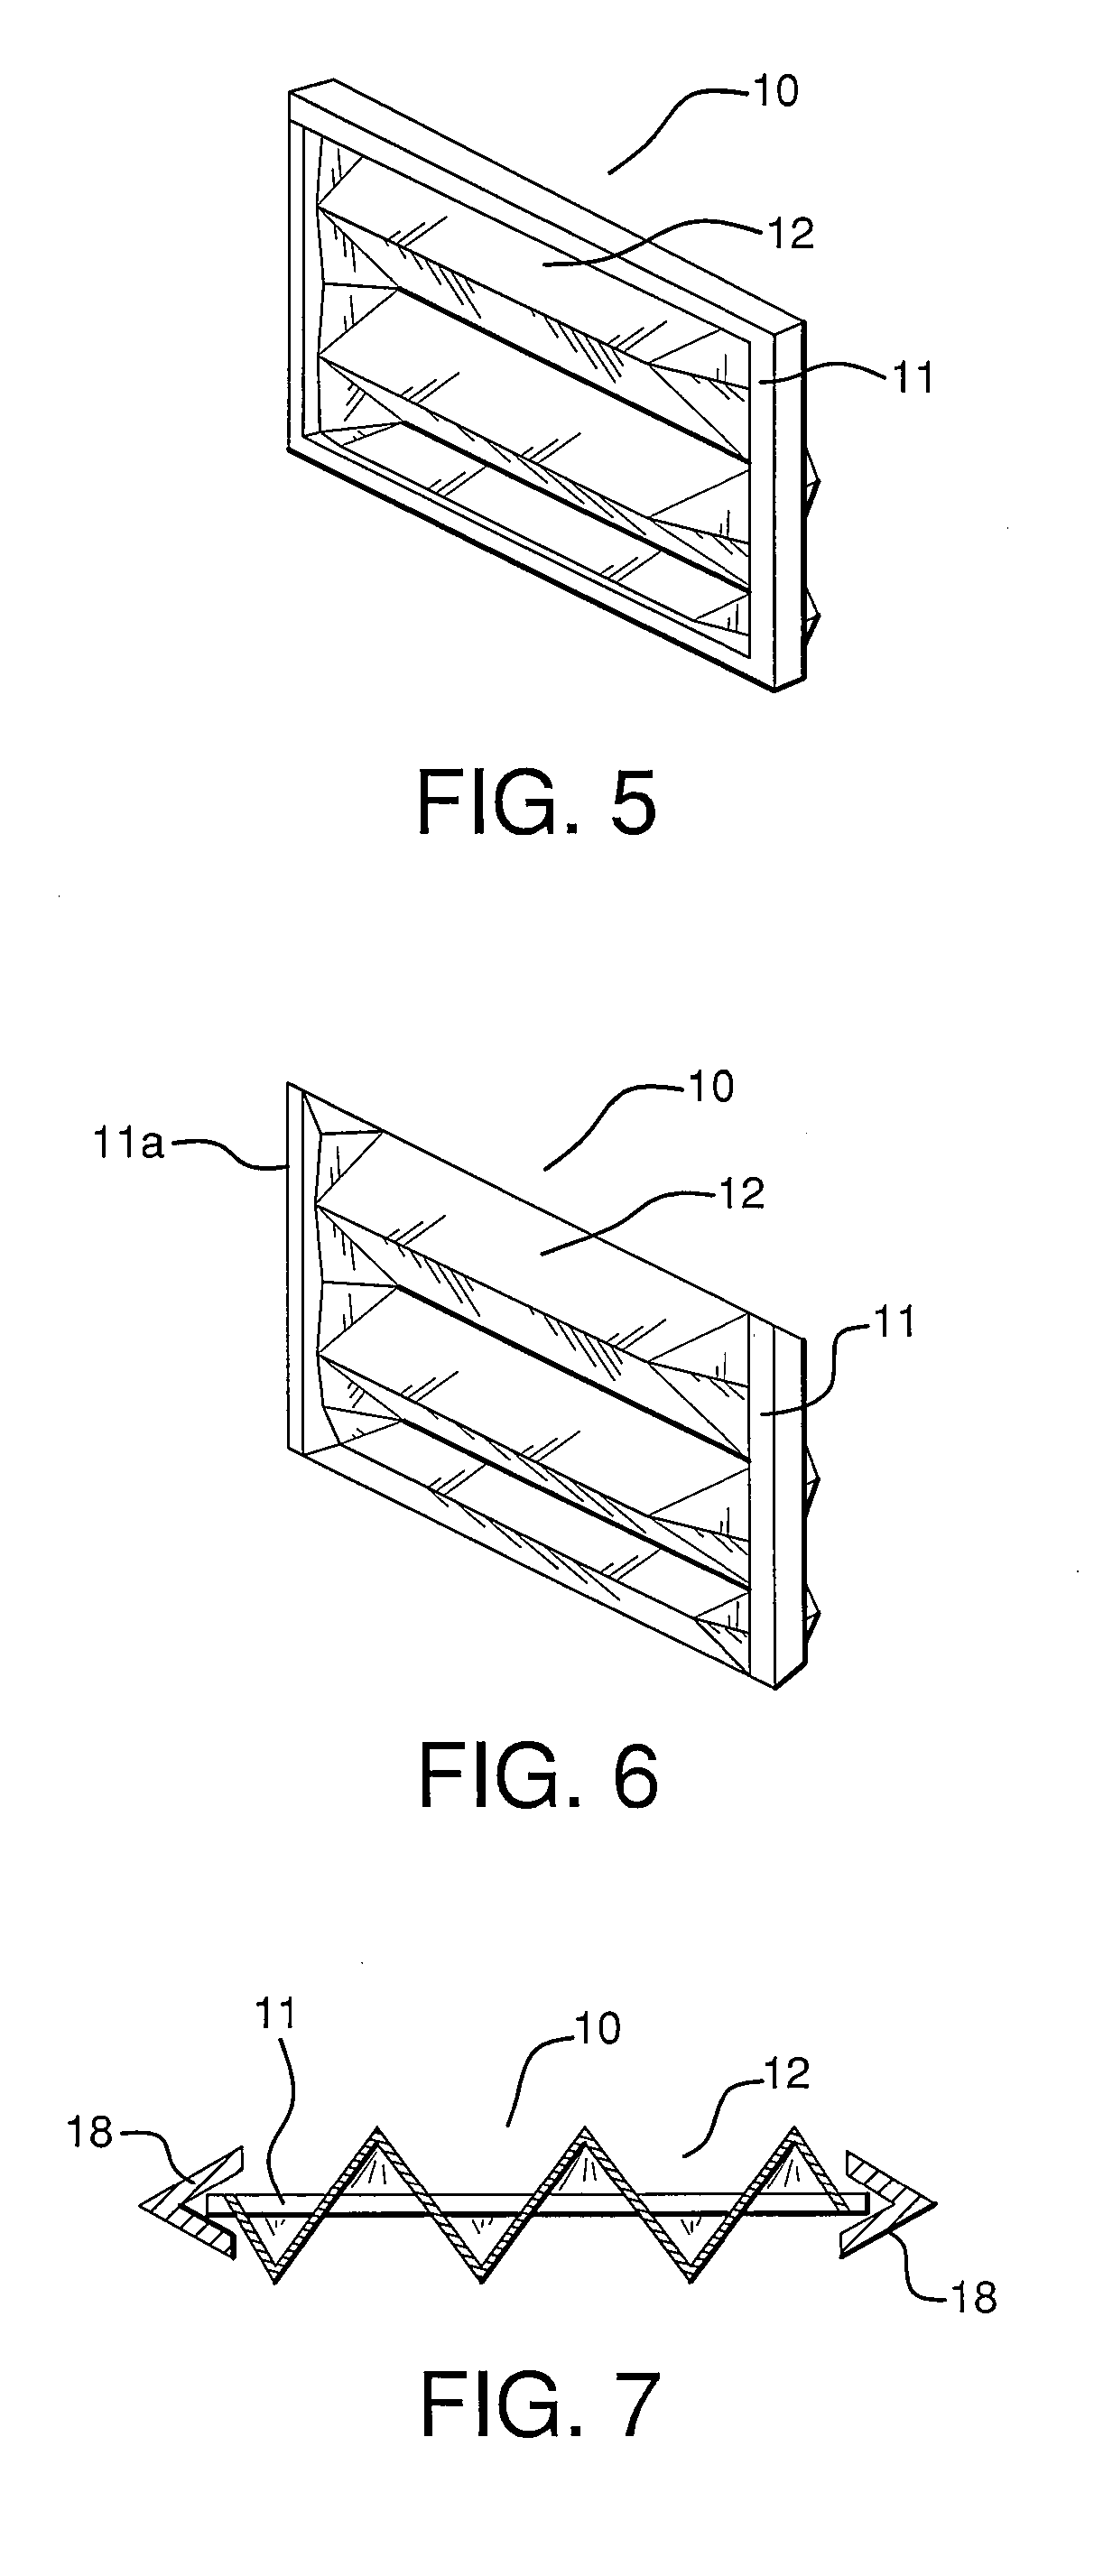 Pleated recirculation filter